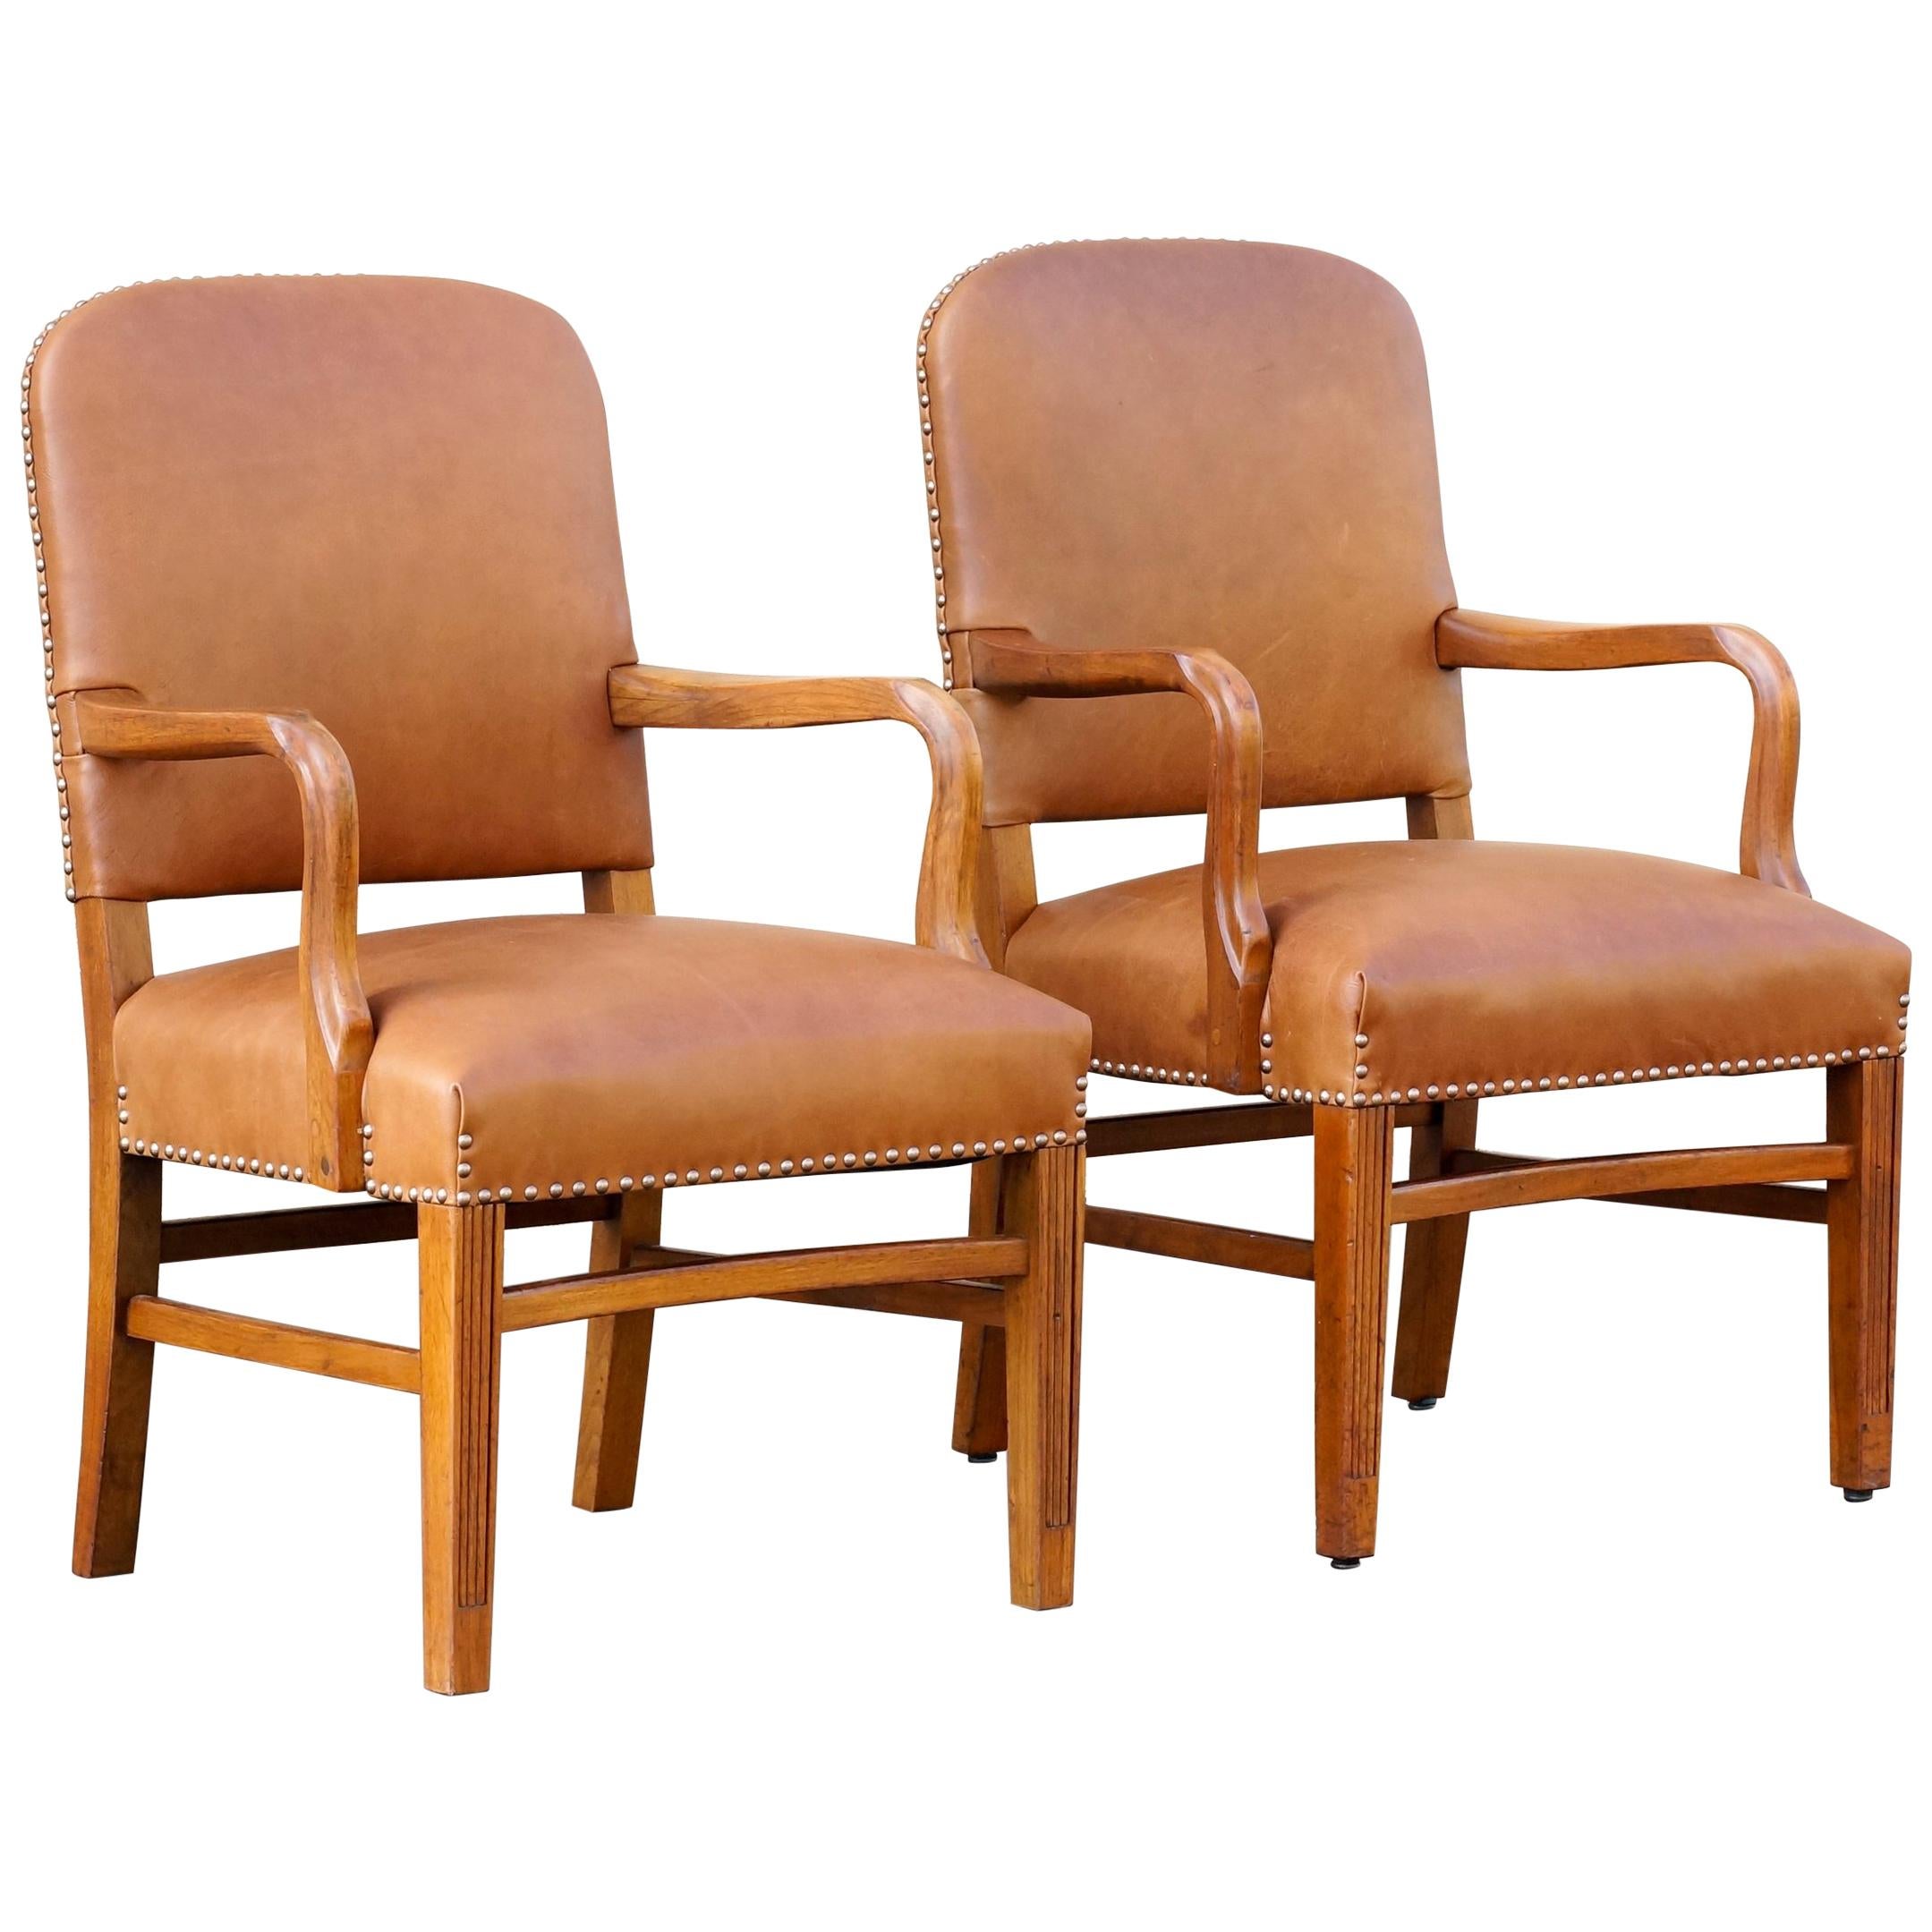 Pair of Gunlocke Leather and Oak Armchairs, 1948 For Sale